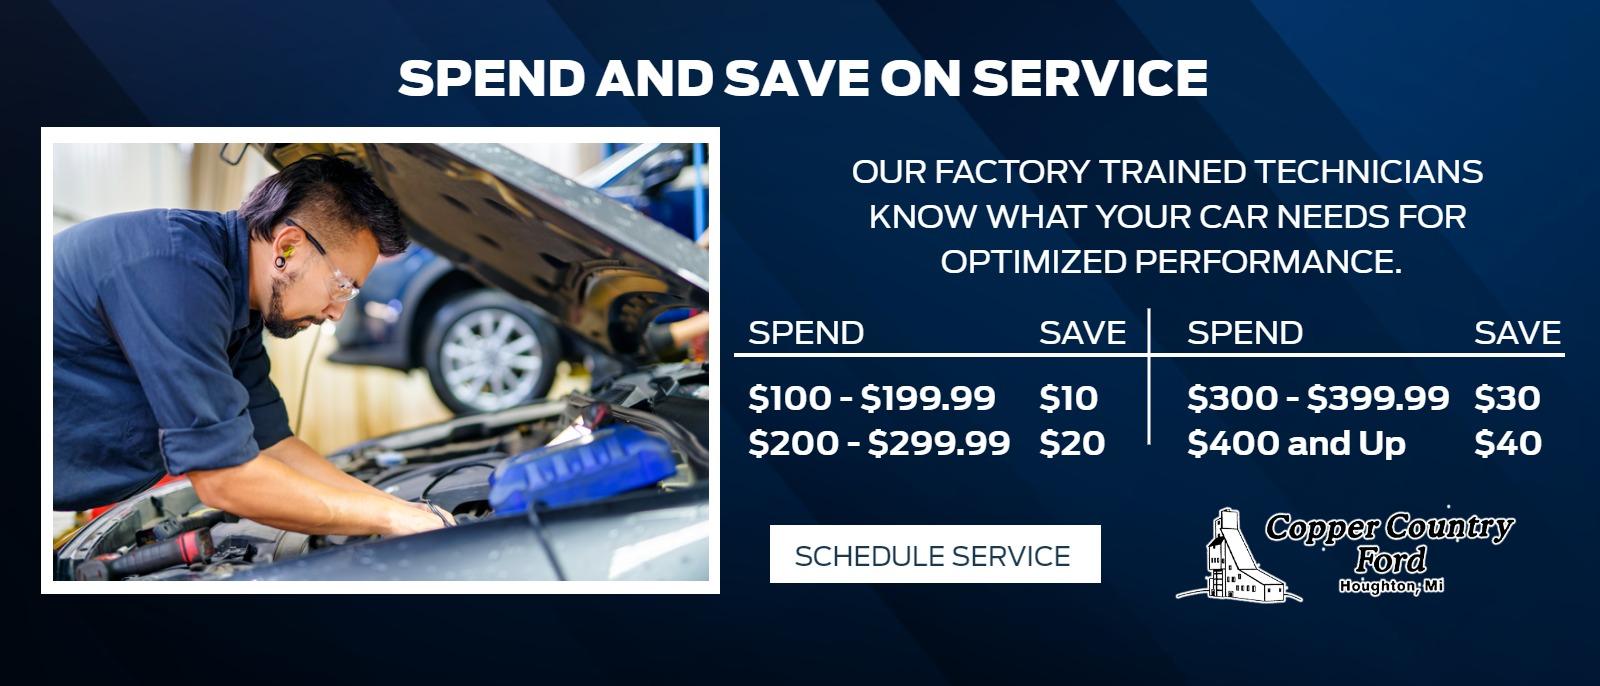 Spend and Save On Service

$100 - $199.99 - $10
$200 - $299.99 - $20
$300 - $399.99 - $30
$400 and Up - $40
Our factory trained technicians know what your car needs for optimized performance.